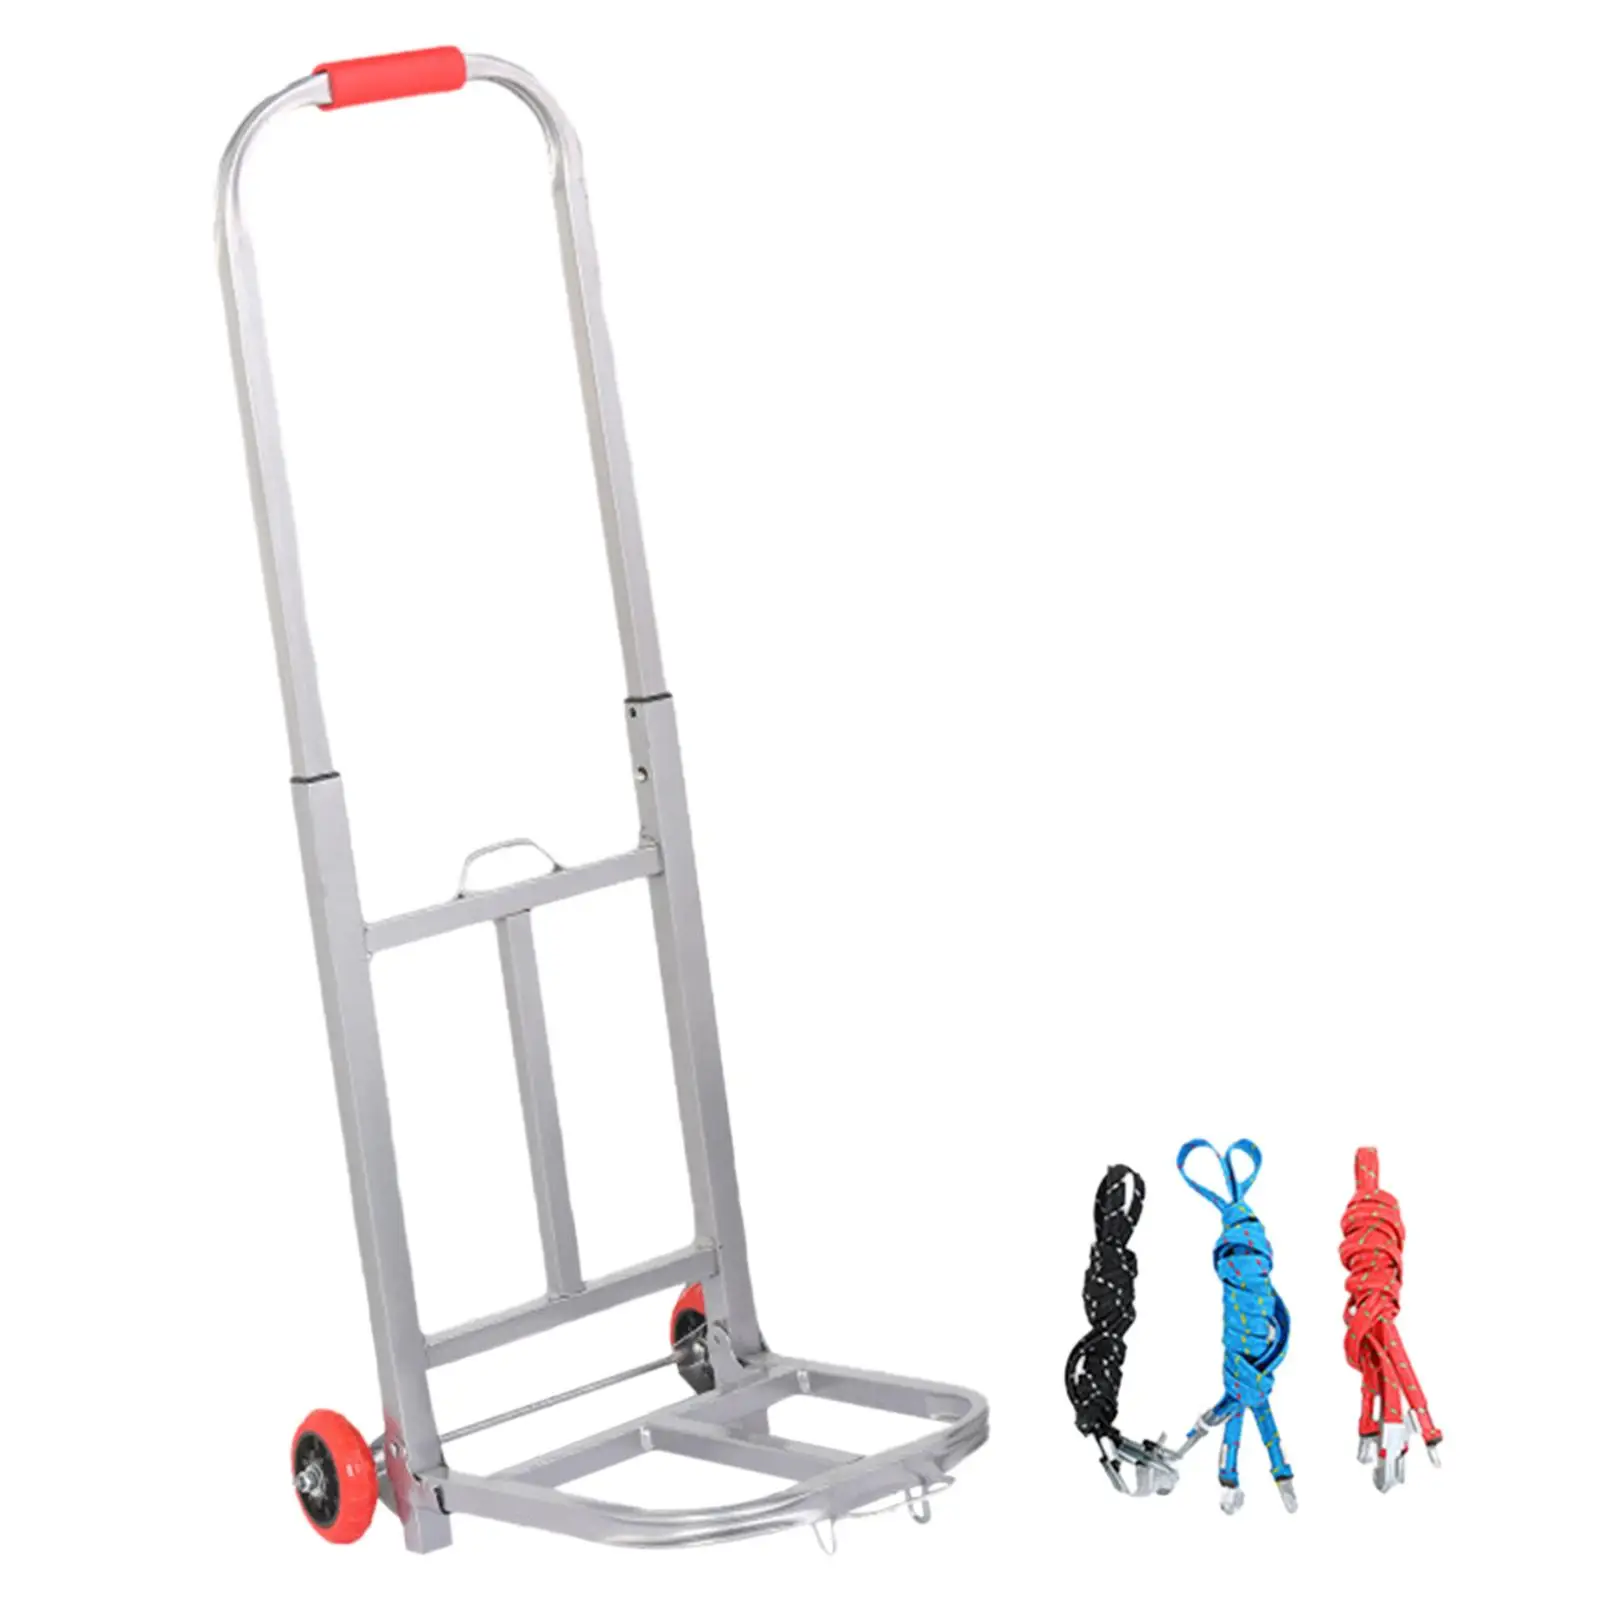 Collapsible Hand Truck Luggage Trolley Cart with 2 Wheels Sturdy Adjustable Handle Shopping Cart Show Exhibitors